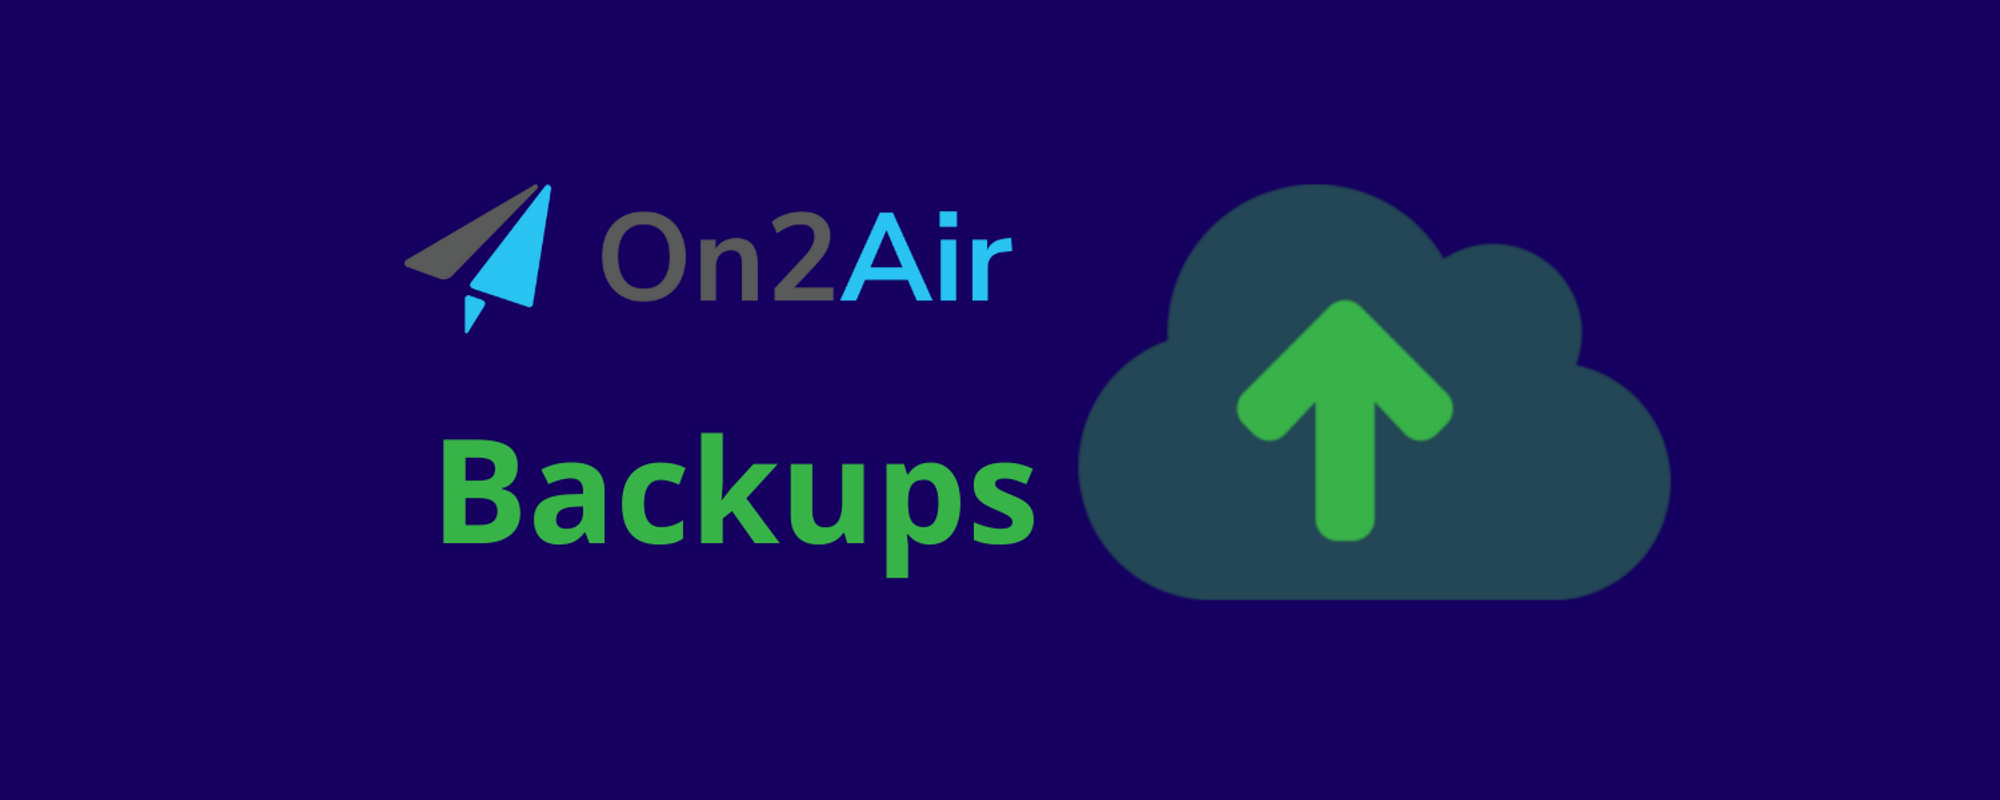 On2Air Backups